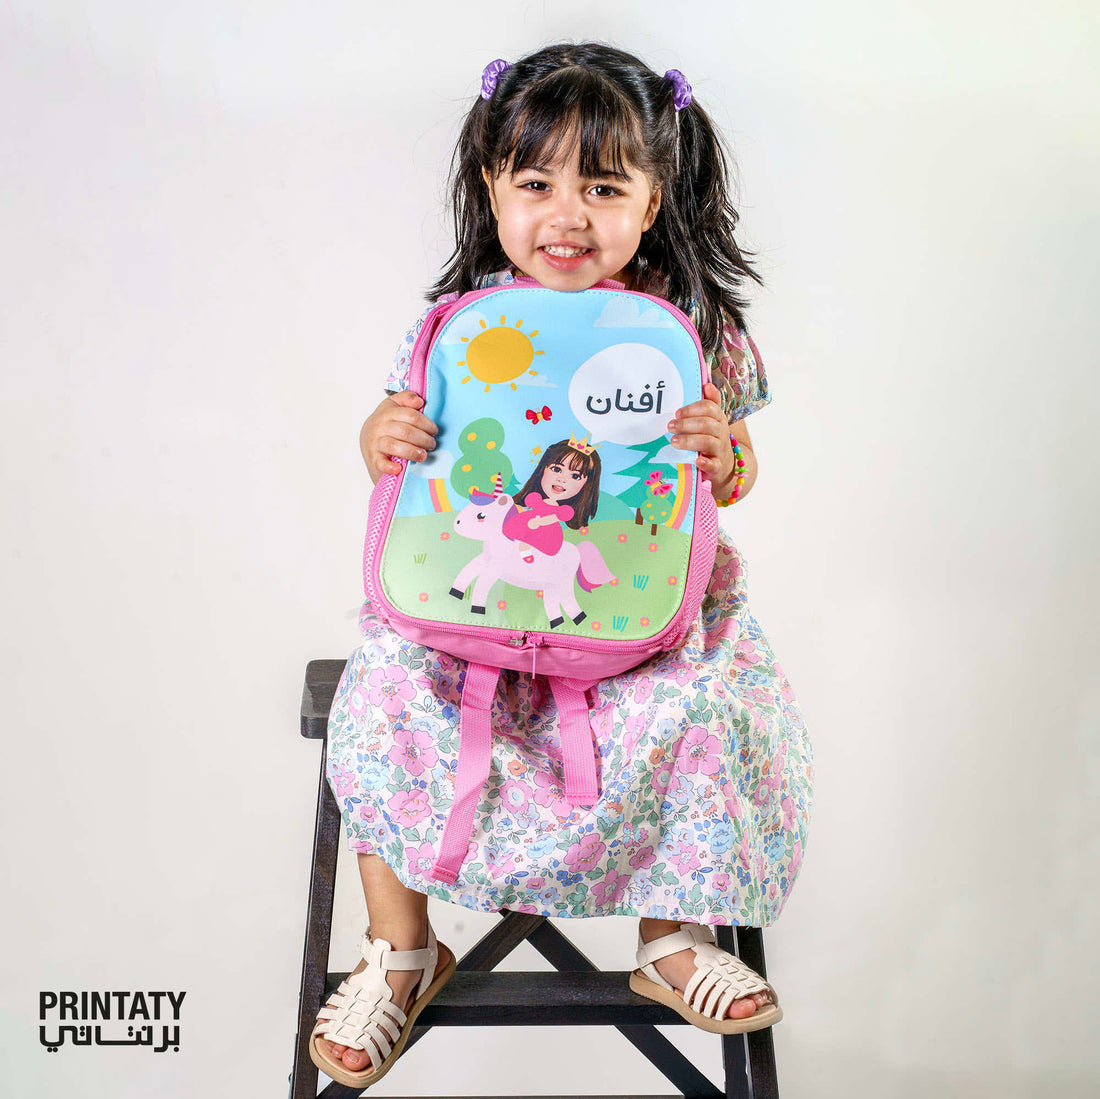 A Small School Bag (suitable for young children) With The Name and Photo of the Child Printed
